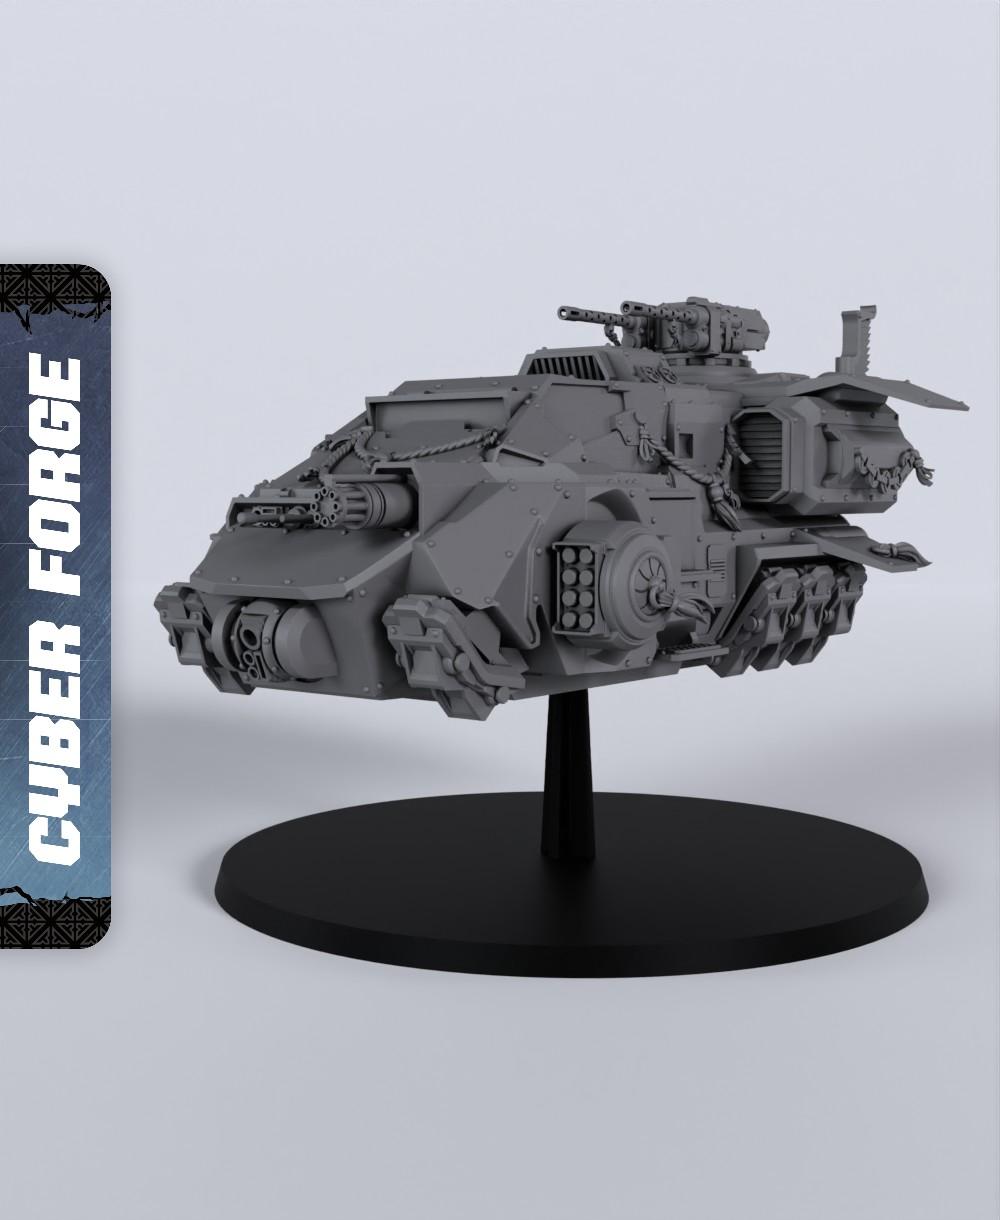 LSR Sunscorch - With Free Cyberpunk Warhammer - 40k Sci-Fi Gift Ideas for RPG and Wargamers 3d model